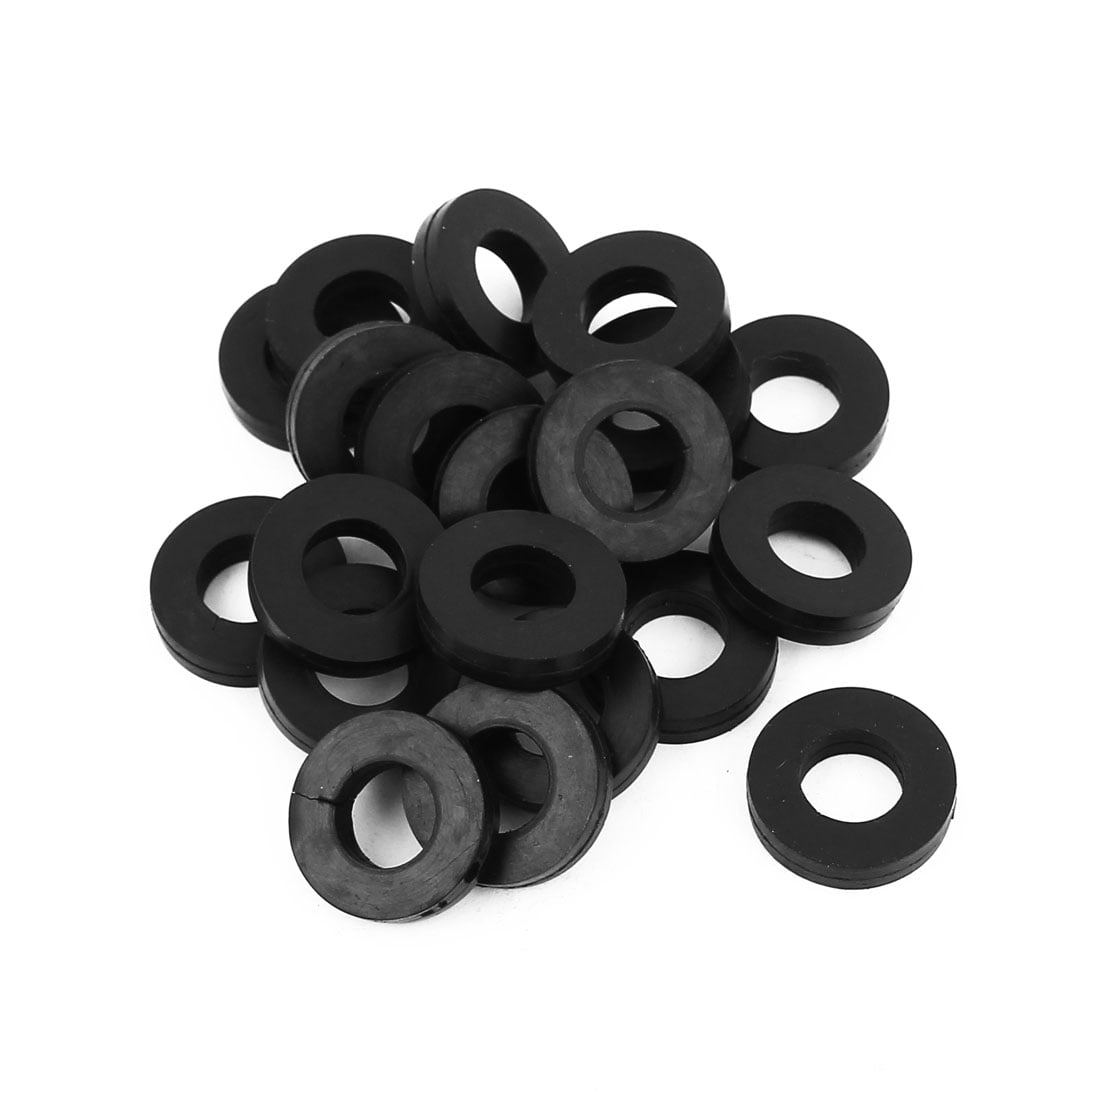 9 x 18 x 4mm O-Ring Hose Gasket Flat Rubber Washer Lot for Faucet Grommet 50pcs 